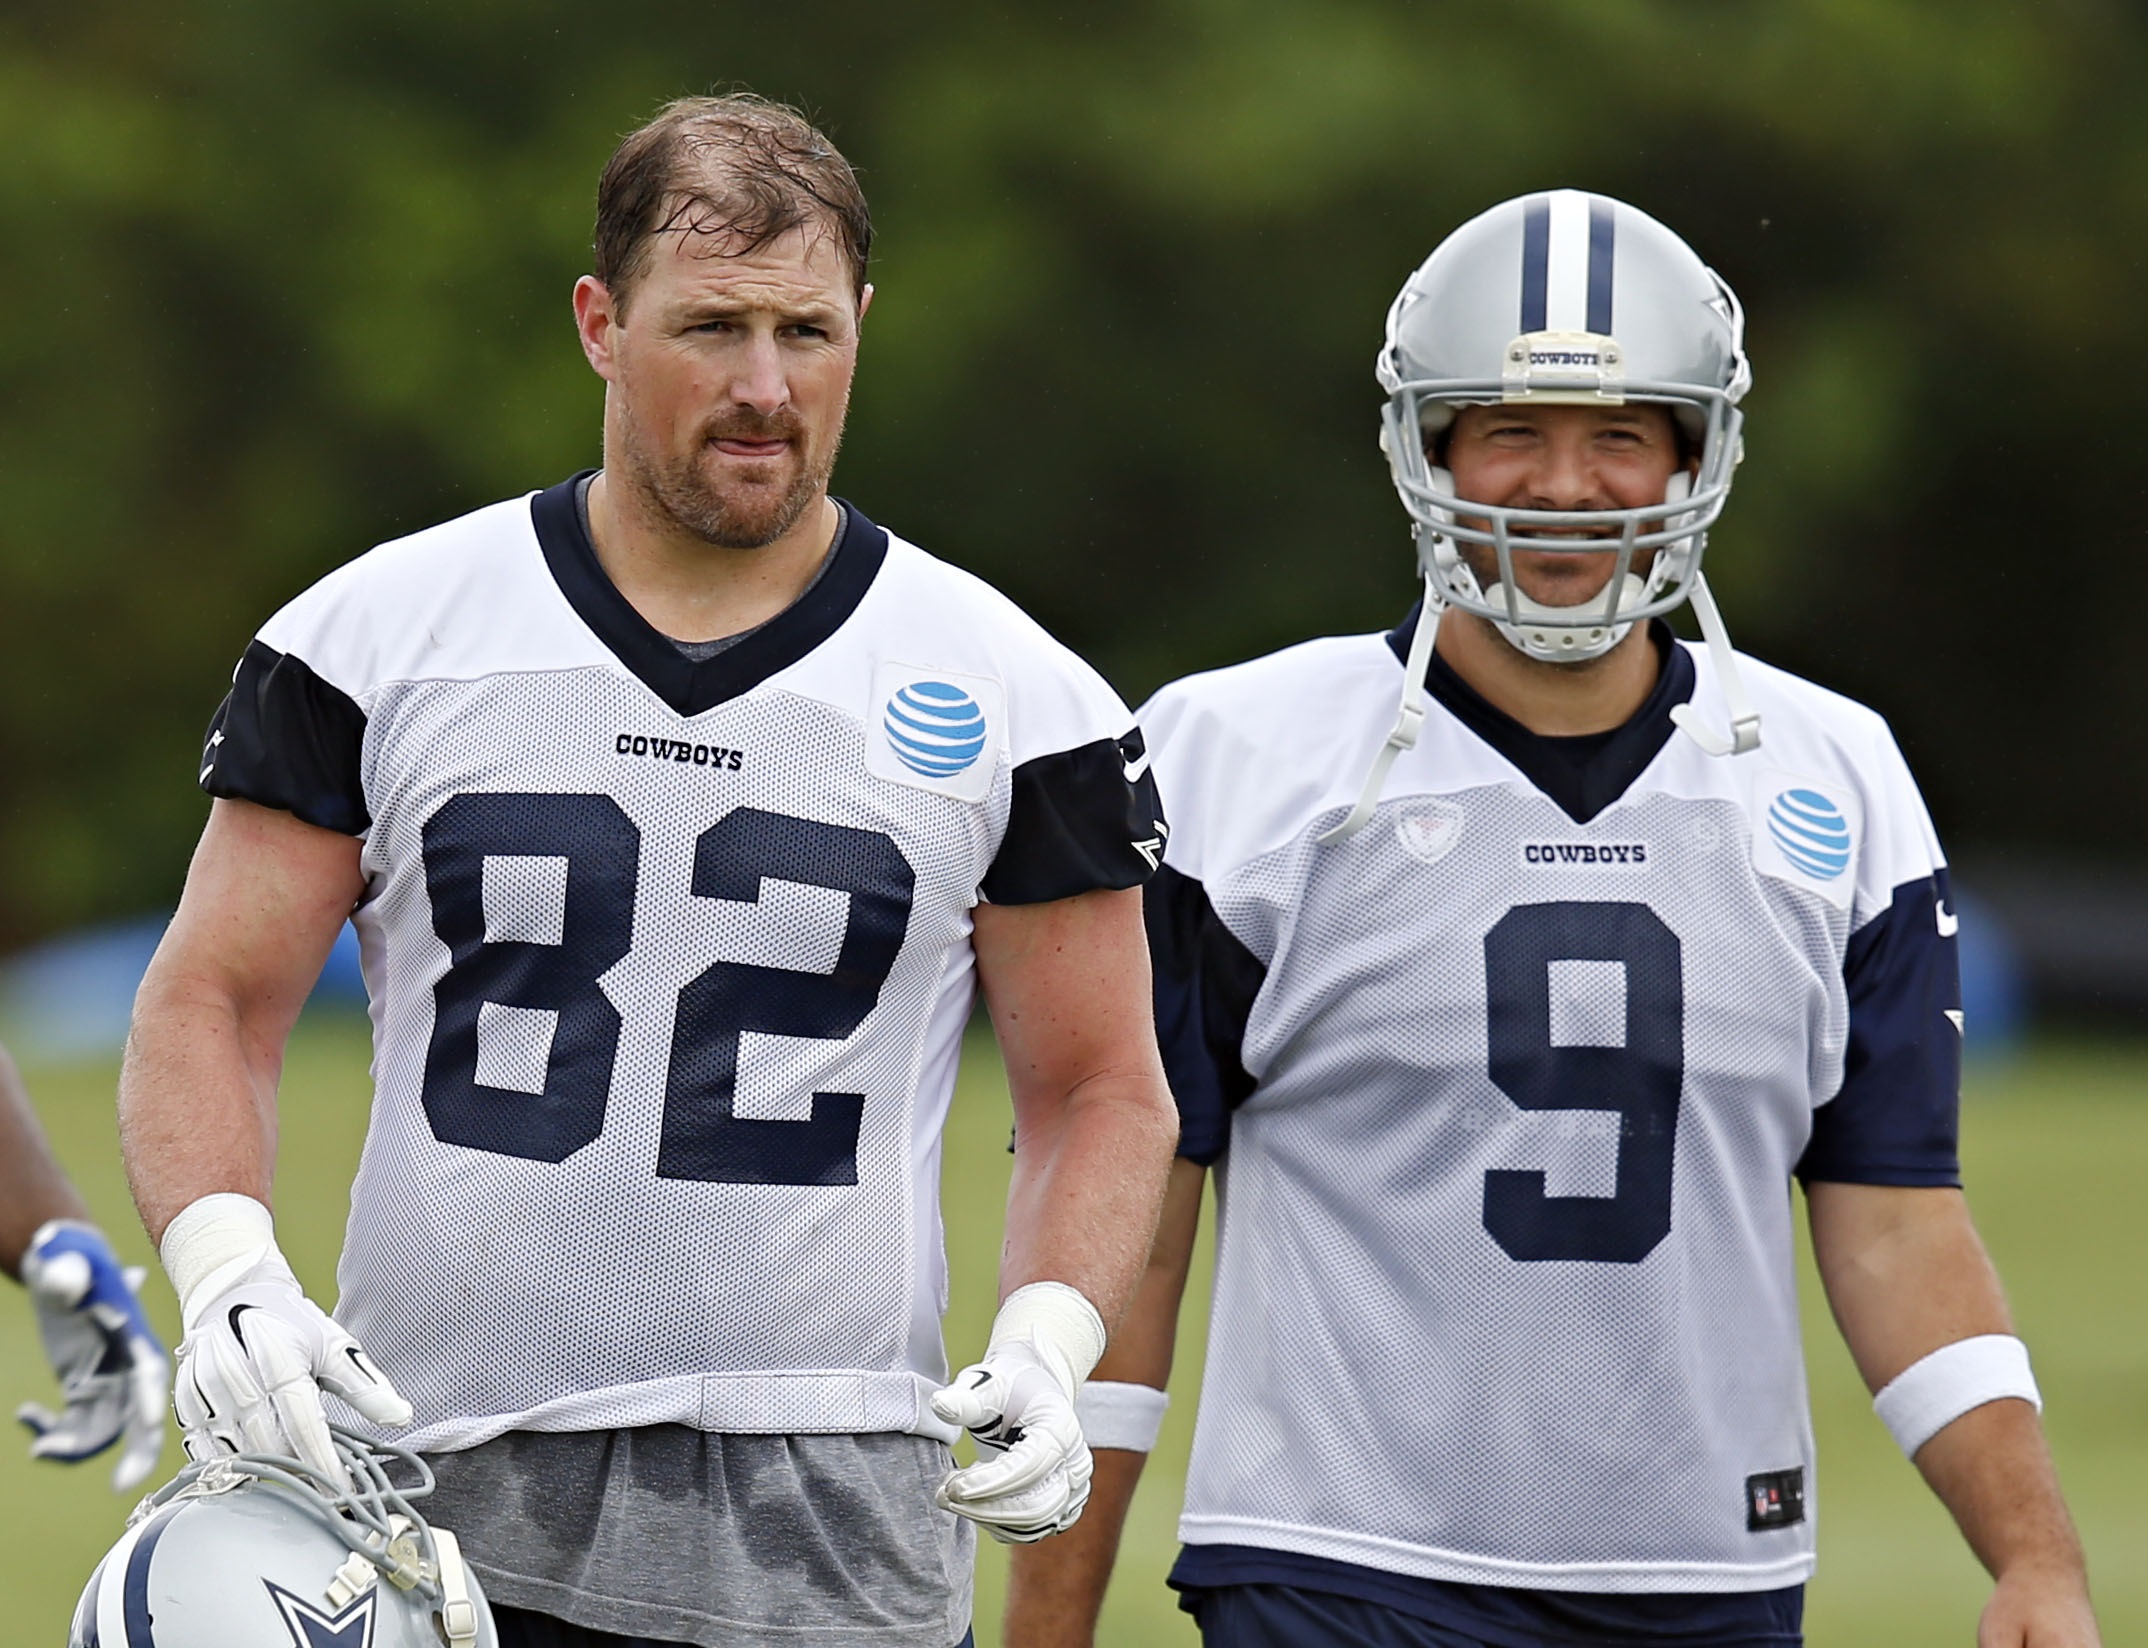 Dallas Cowboys tight end Jason Witten (82) and quarterback Tony Romo walk off the field during OTA's Wednesday, June 1, 2016 in Irving, Texas. (G.J. McCarthy/The Dallas Morning News)